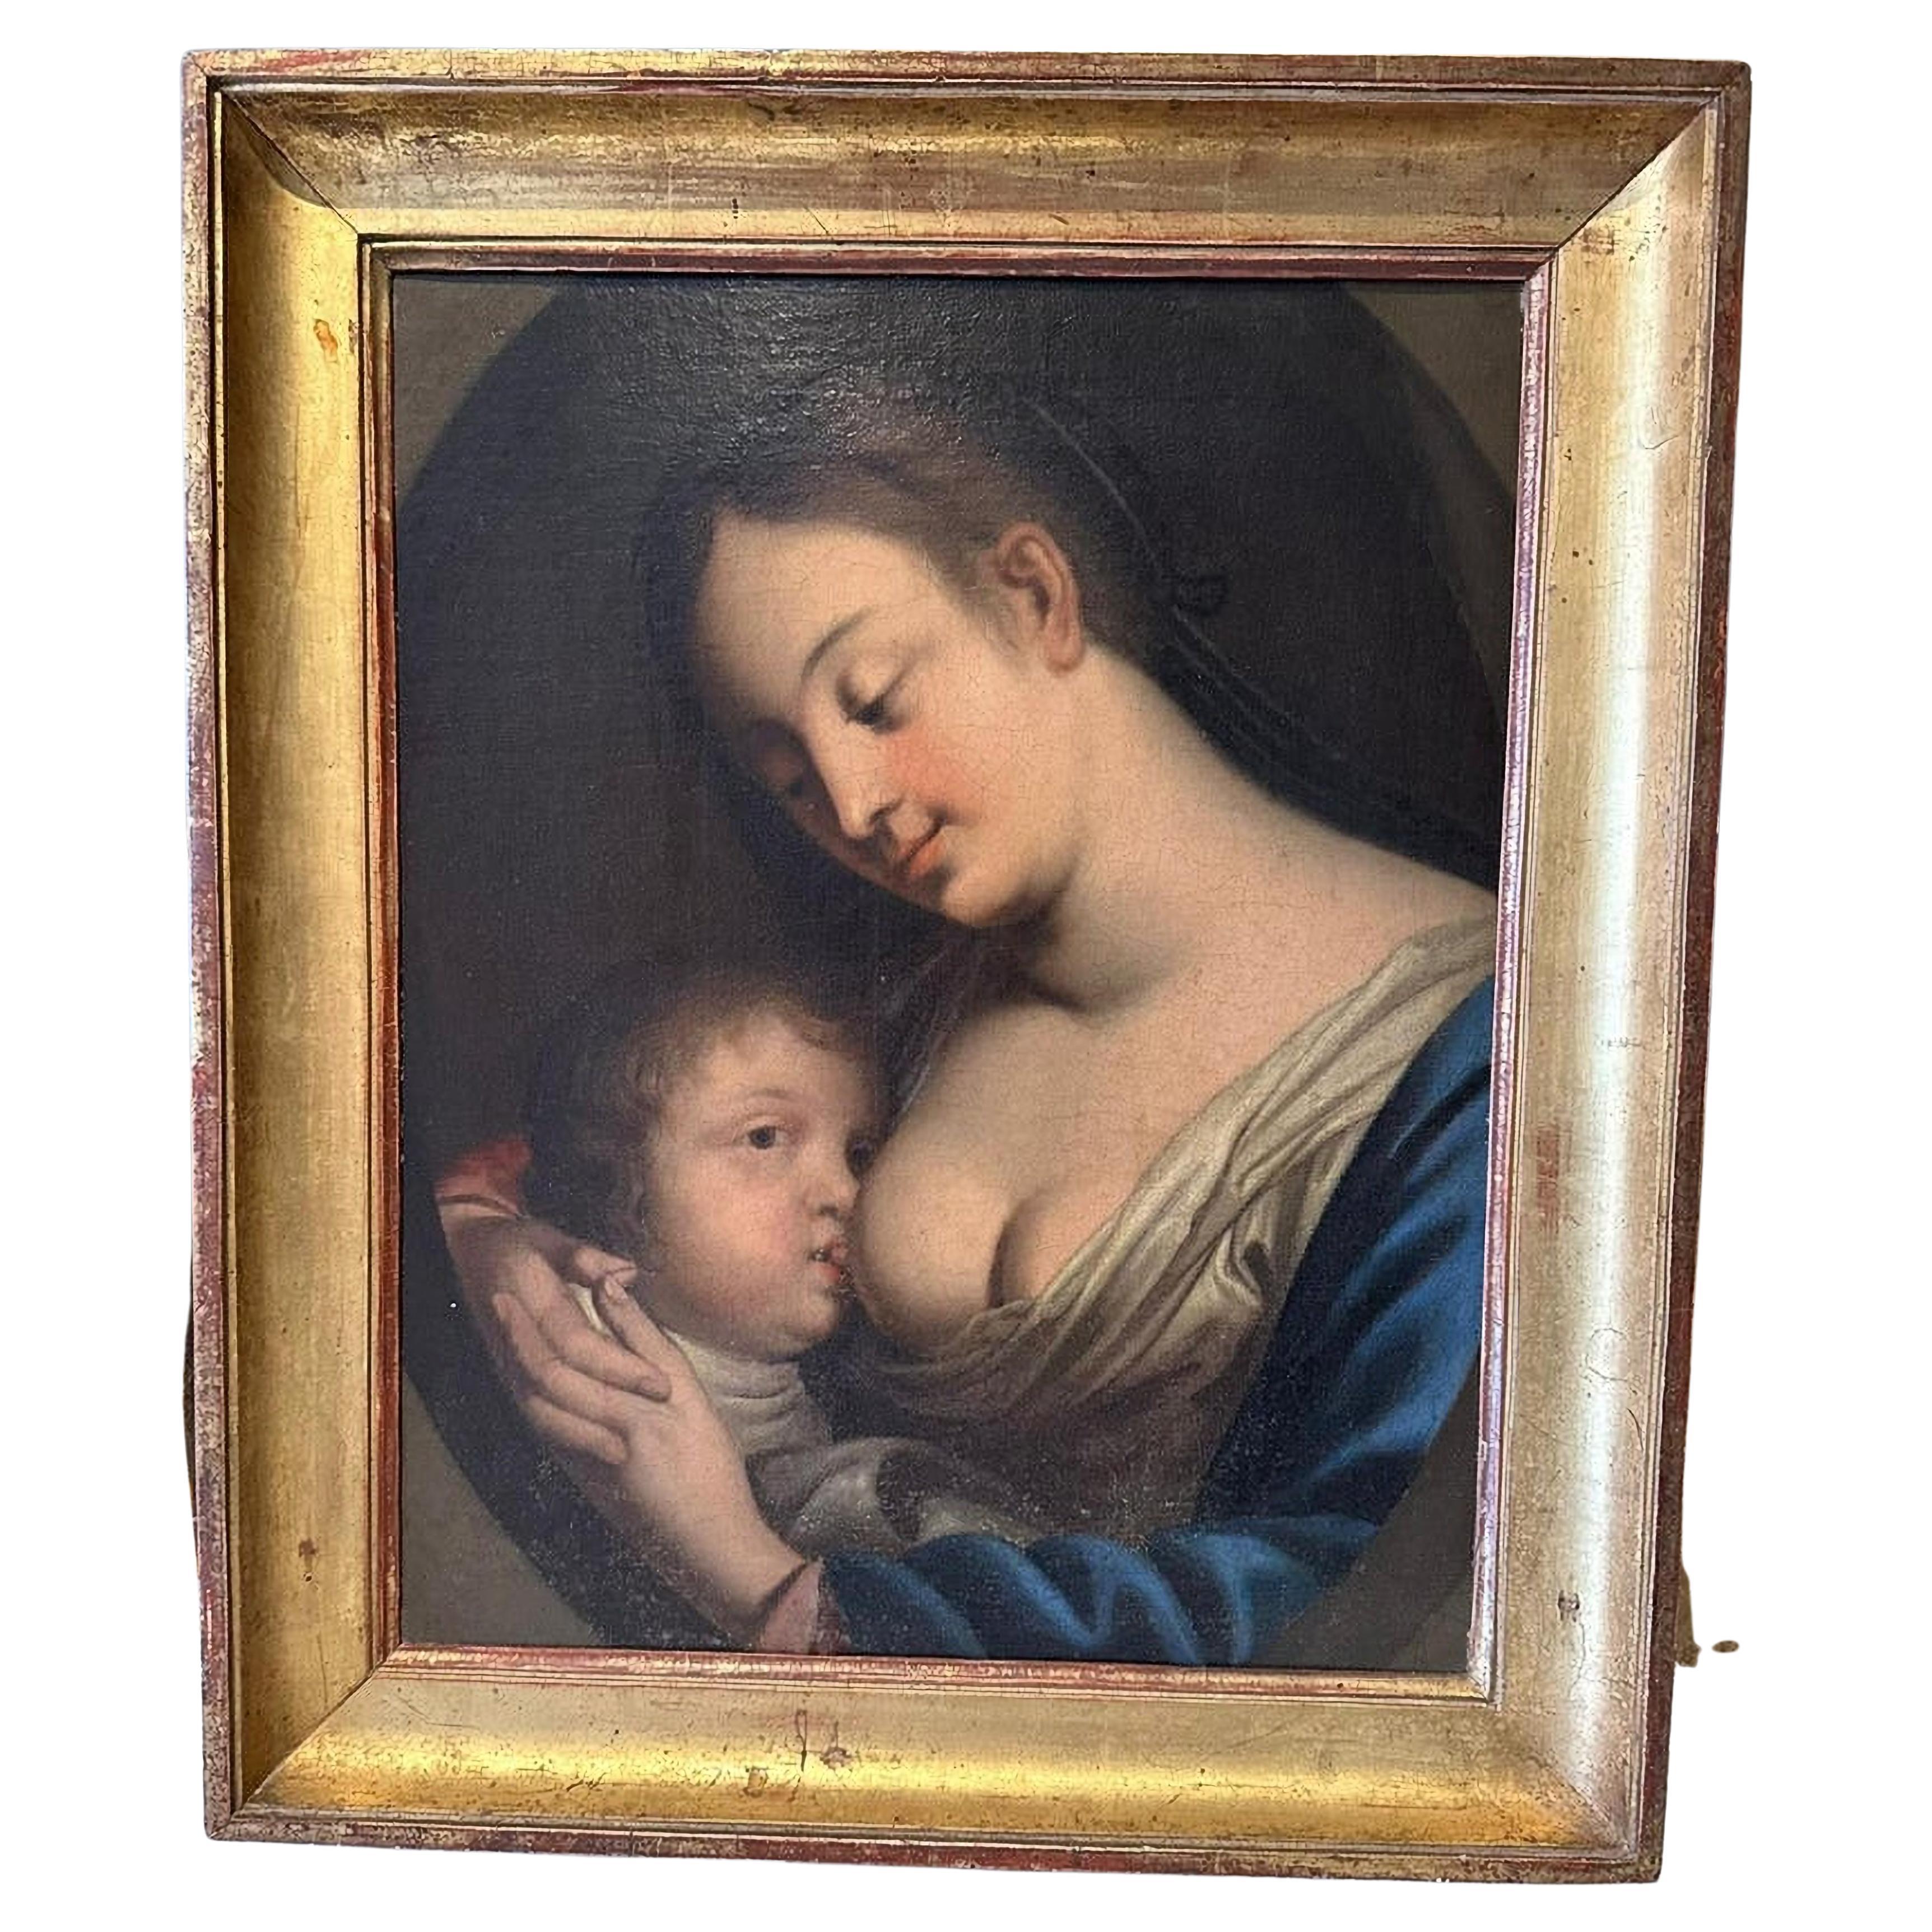 Important Flemish School of the 17th Century "Virgin of the Milk" For Sale